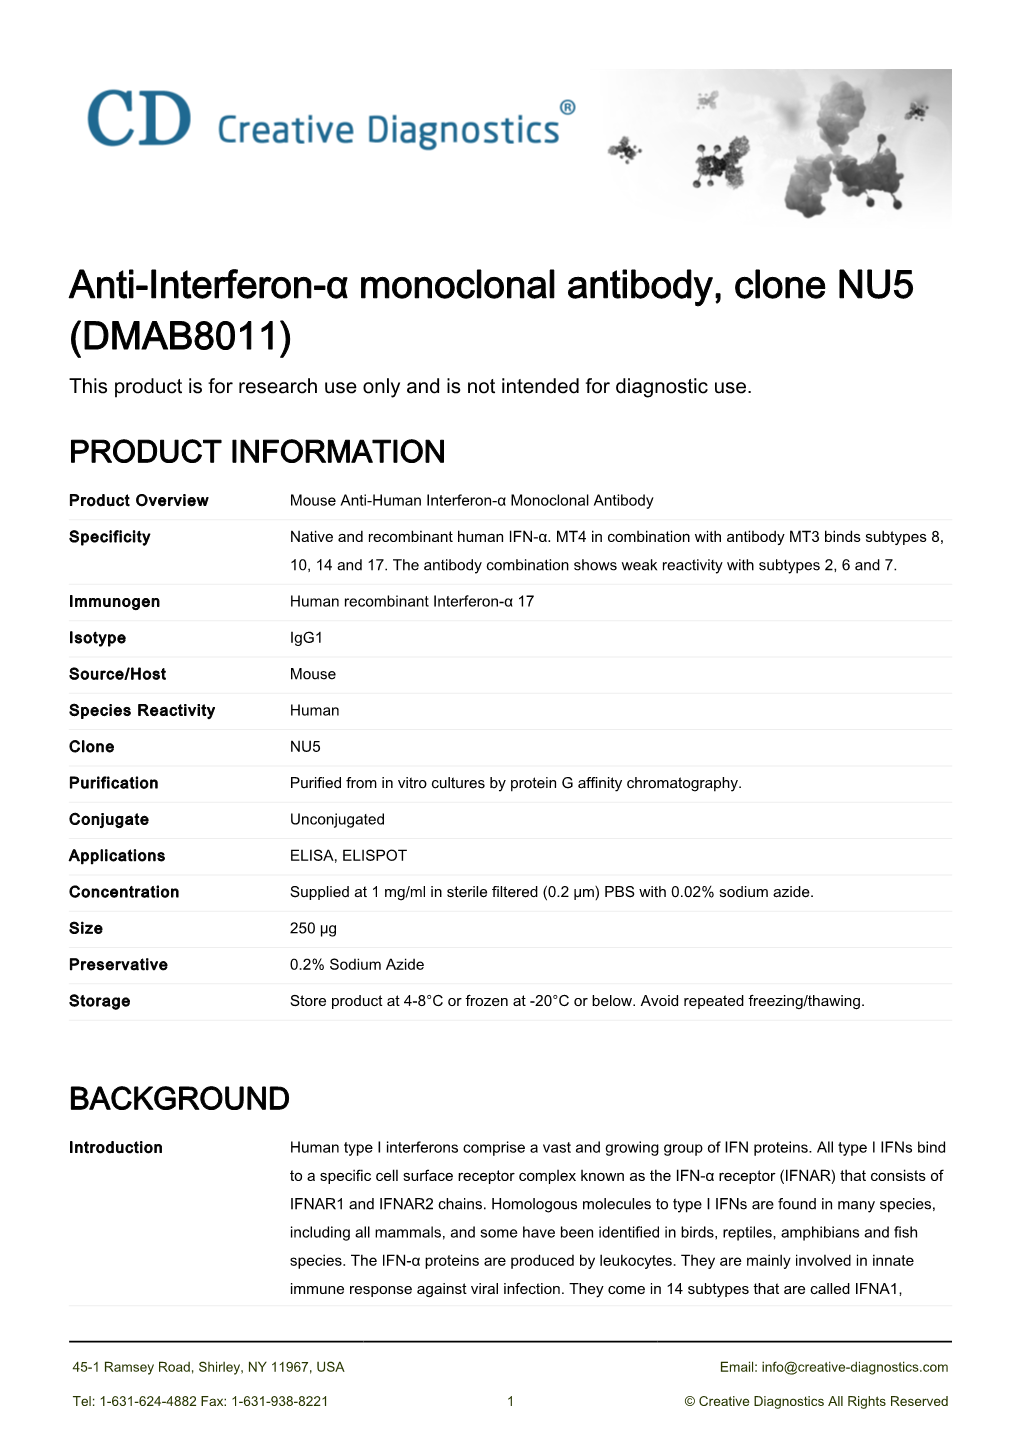 Anti-Interferon-Α Monoclonal Antibody, Clone NU5 (DMAB8011) This Product Is for Research Use Only and Is Not Intended for Diagnostic Use